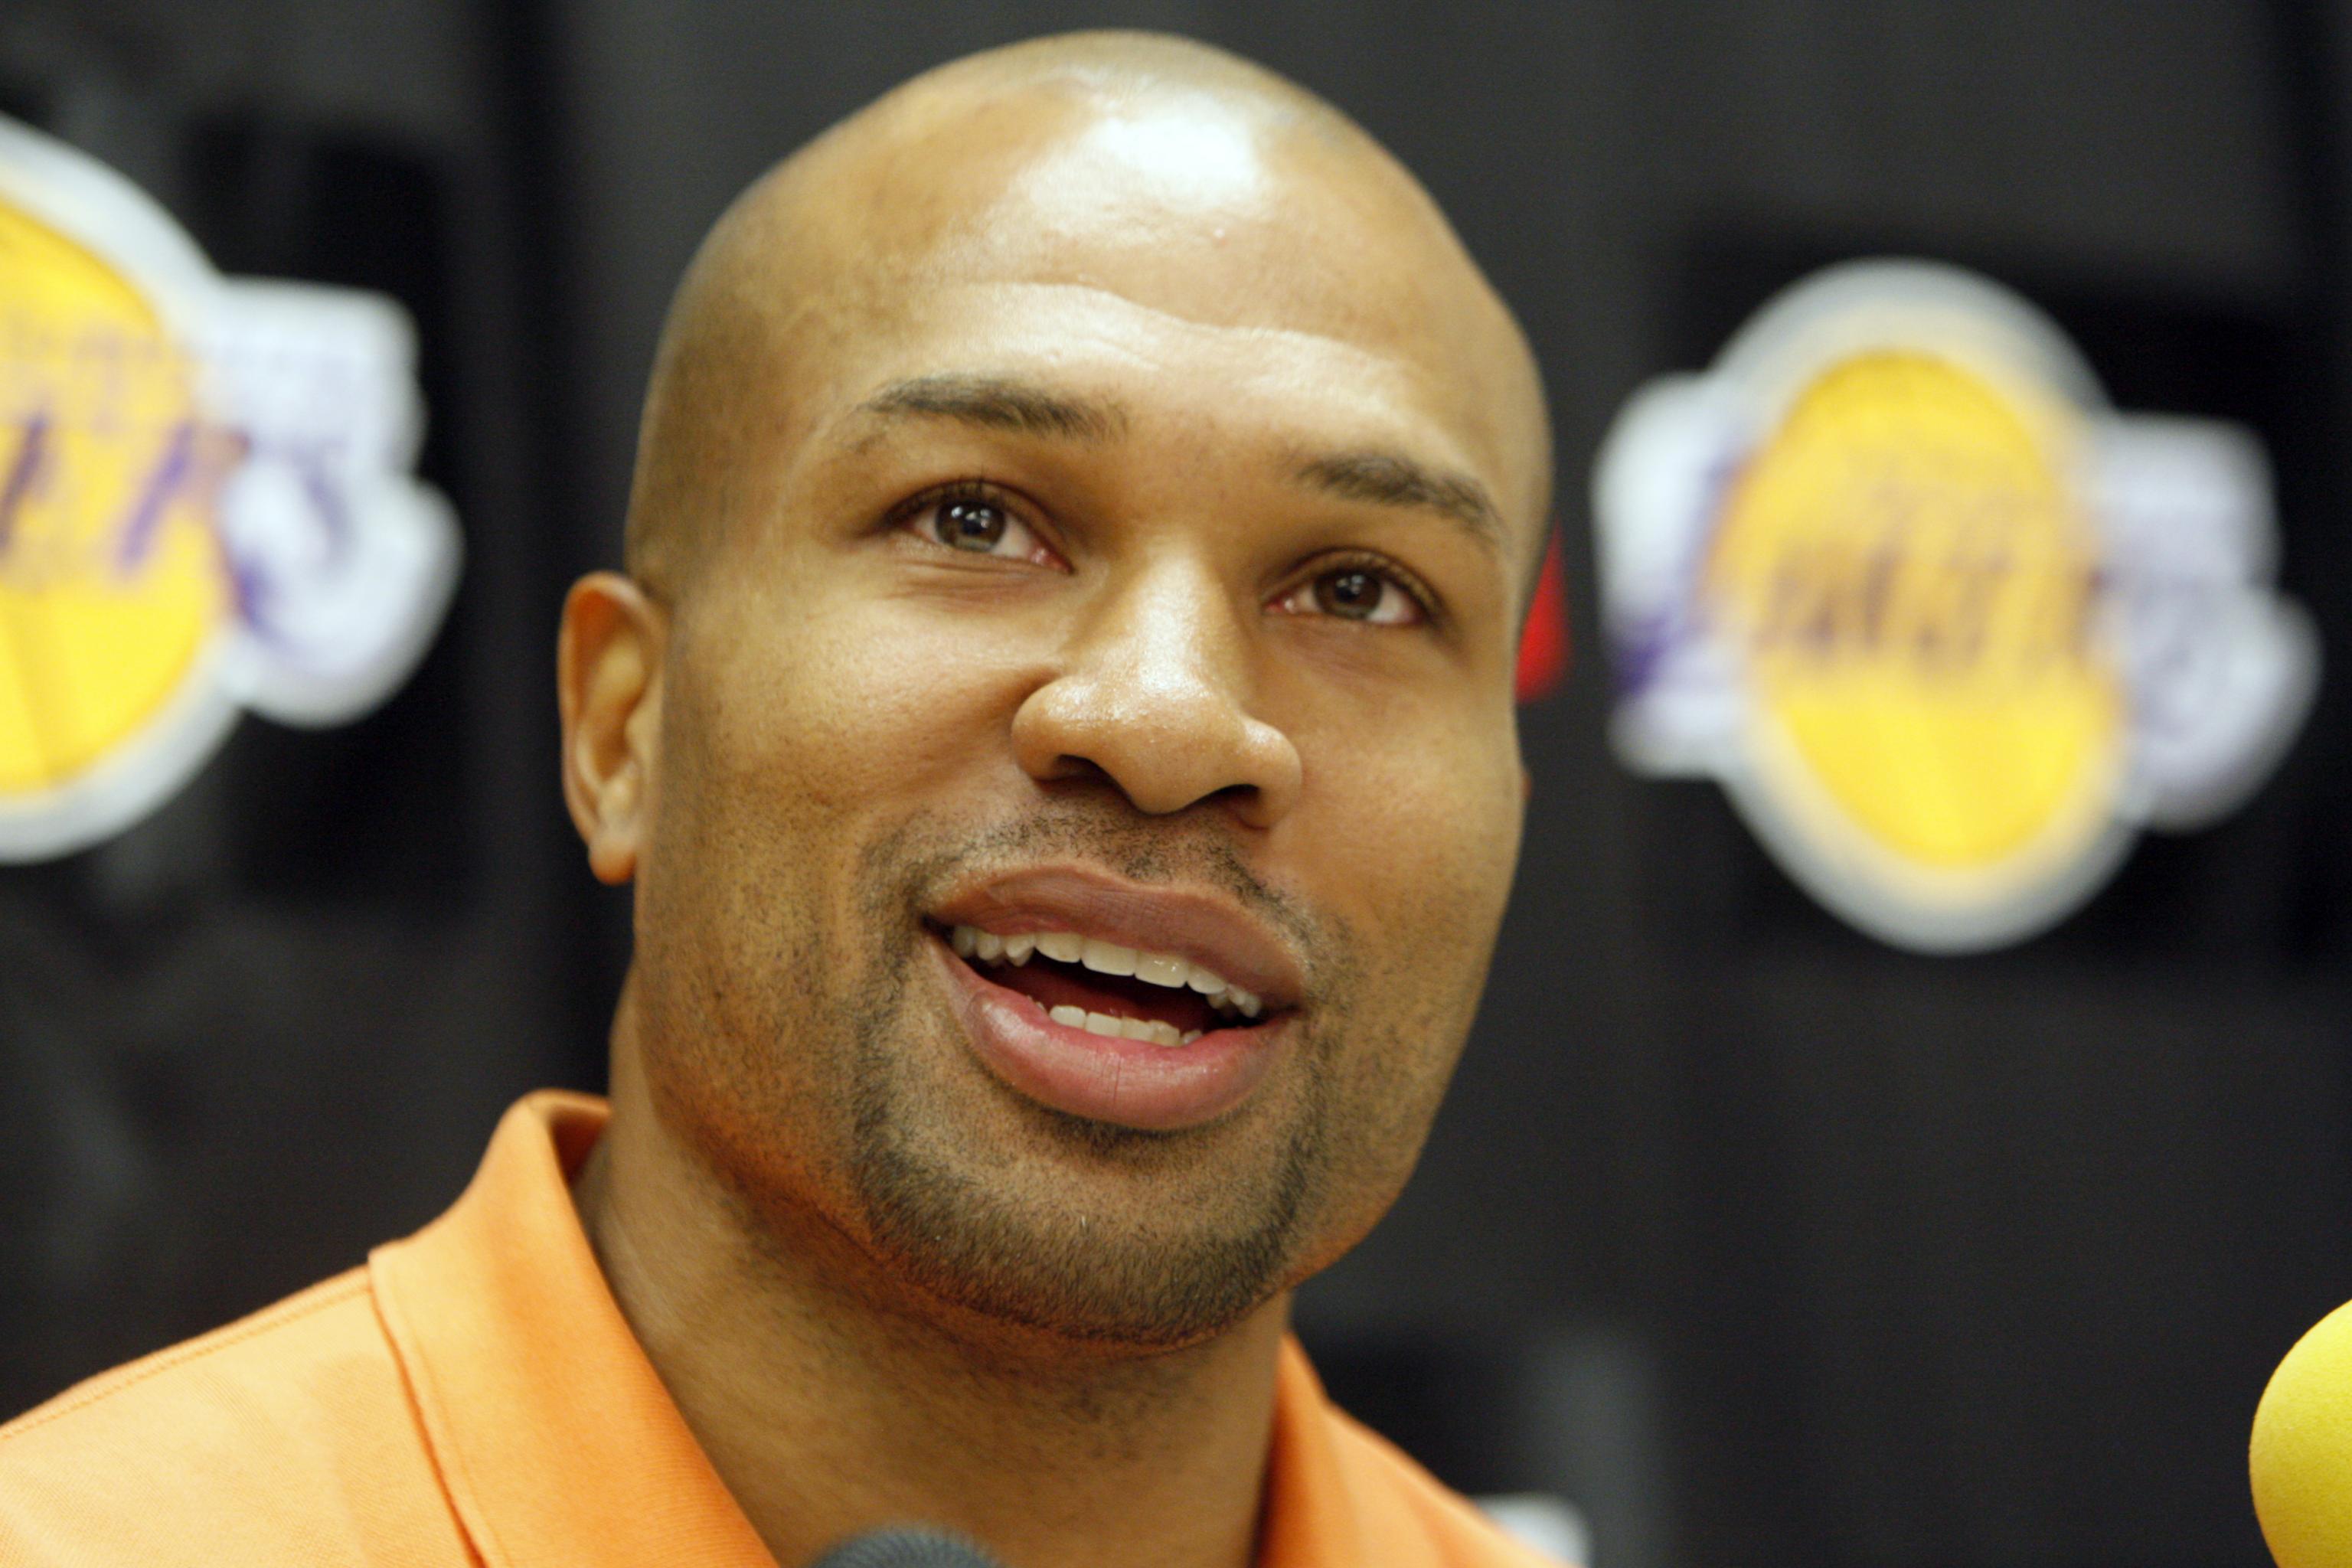 Derek Fisher mulling coaching possibilities with Los Angeles Lakers, Knicks  – Daily News